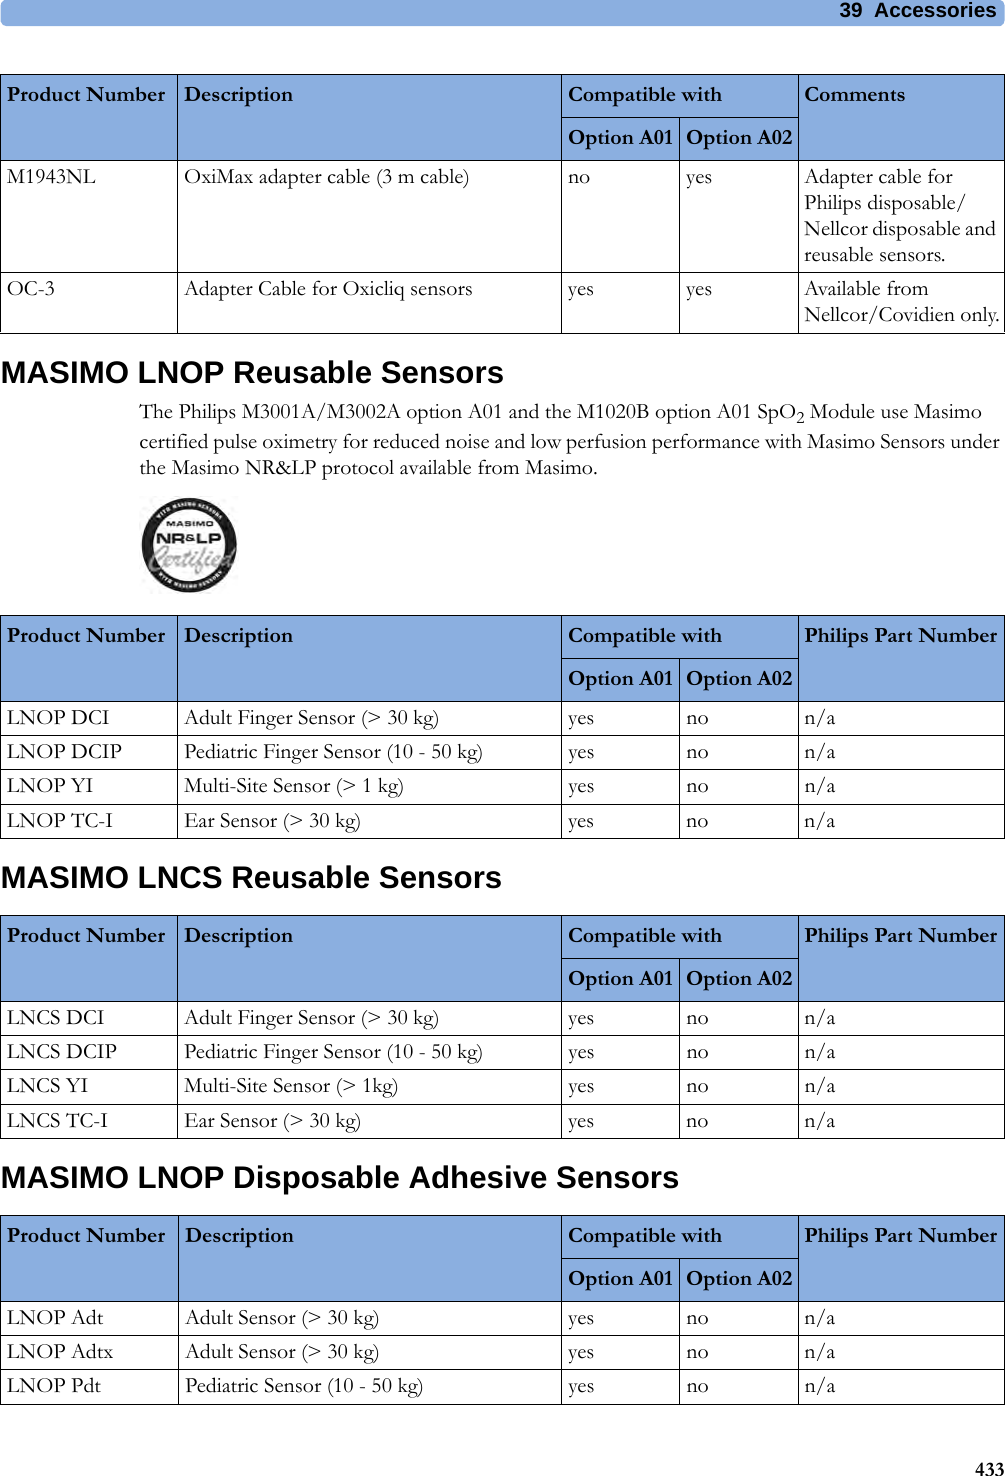 39 Accessories433MASIMO LNOP Reusable SensorsThe Philips M3001A/M3002A option A01 and the M1020B option A01 SpO2 Module use Masimo certified pulse oximetry for reduced noise and low perfusion performance with Masimo Sensors under the Masimo NR&amp;LP protocol available from Masimo.MASIMO LNCS Reusable SensorsMASIMO LNOP Disposable Adhesive SensorsM1943NL OxiMax adapter cable (3 m cable) no yes Adapter cable for Philips disposable/Nellcor disposable and reusable sensors.OC-3 Adapter Cable for Oxicliq sensors yes yes Available from Nellcor/Covidien only.Product Number Description Compatible with CommentsOption A01 Option A02Product Number Description Compatible with Philips Part NumberOption A01 Option A02LNOP DCI Adult Finger Sensor (&gt; 30 kg) yes no n/aLNOP DCIP Pediatric Finger Sensor (10 - 50 kg) yes no n/aLNOP YI Multi-Site Sensor (&gt; 1 kg) yes no n/aLNOP TC-I Ear Sensor (&gt; 30 kg) yes no n/aProduct Number Description Compatible with Philips Part NumberOption A01 Option A02LNCS DCI Adult Finger Sensor (&gt; 30 kg) yes no n/aLNCS DCIP Pediatric Finger Sensor (10 - 50 kg) yes no n/aLNCS YI Multi-Site Sensor (&gt; 1kg) yes no n/aLNCS TC-I Ear Sensor (&gt; 30 kg) yes no n/aProduct Number Description Compatible with Philips Part NumberOption A01 Option A02LNOP Adt Adult Sensor (&gt; 30 kg) yes no n/aLNOP Adtx Adult Sensor (&gt; 30 kg) yes no n/aLNOP Pdt Pediatric Sensor (10 - 50 kg) yes no n/a